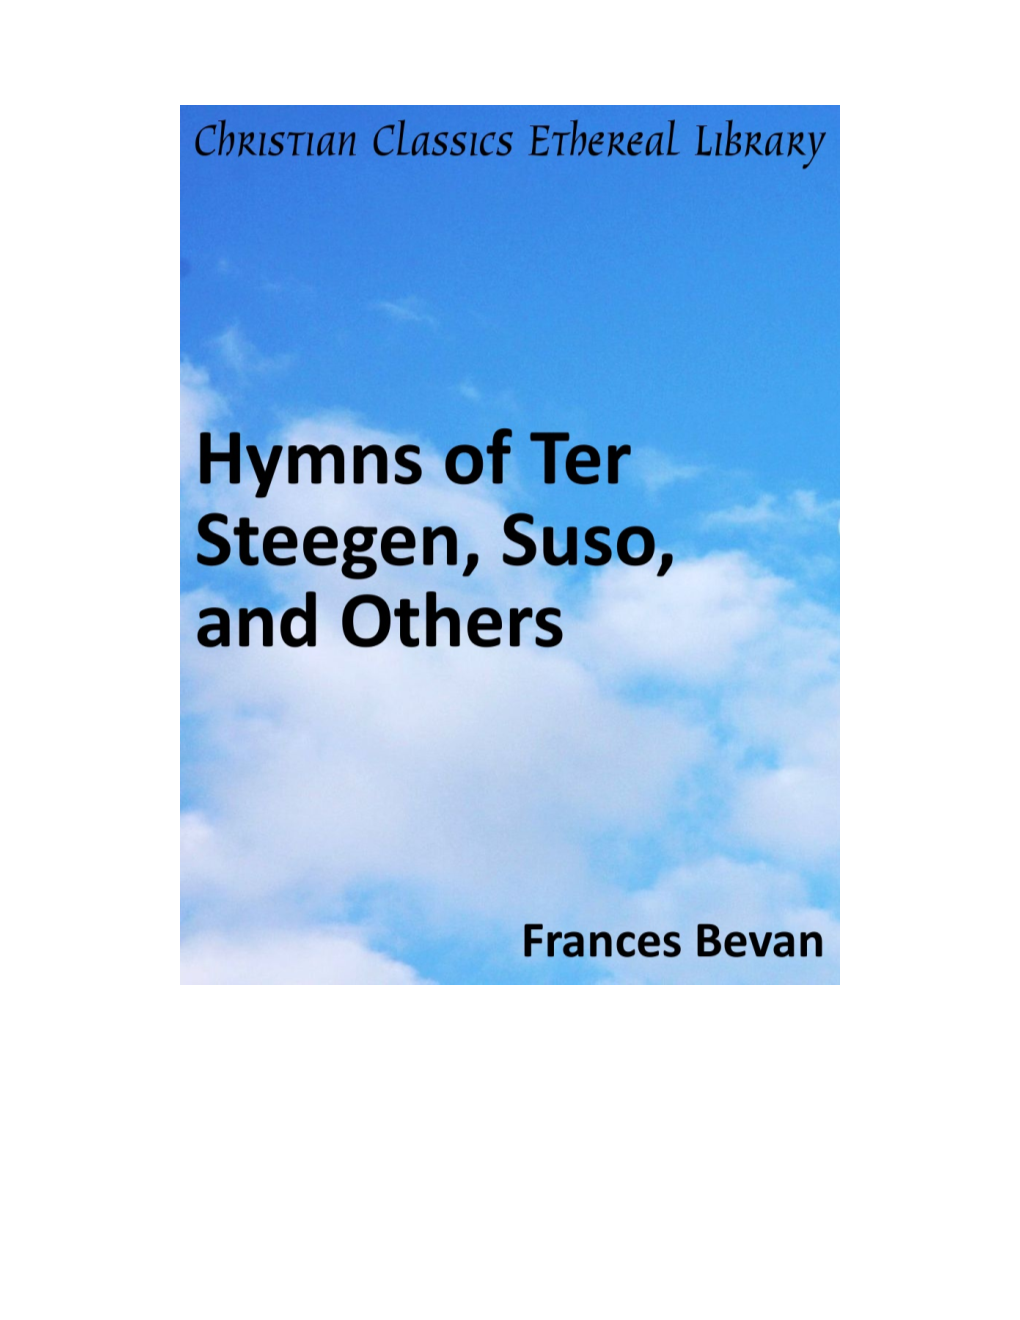 Hymns of Ter Steegen, Suso, and Others